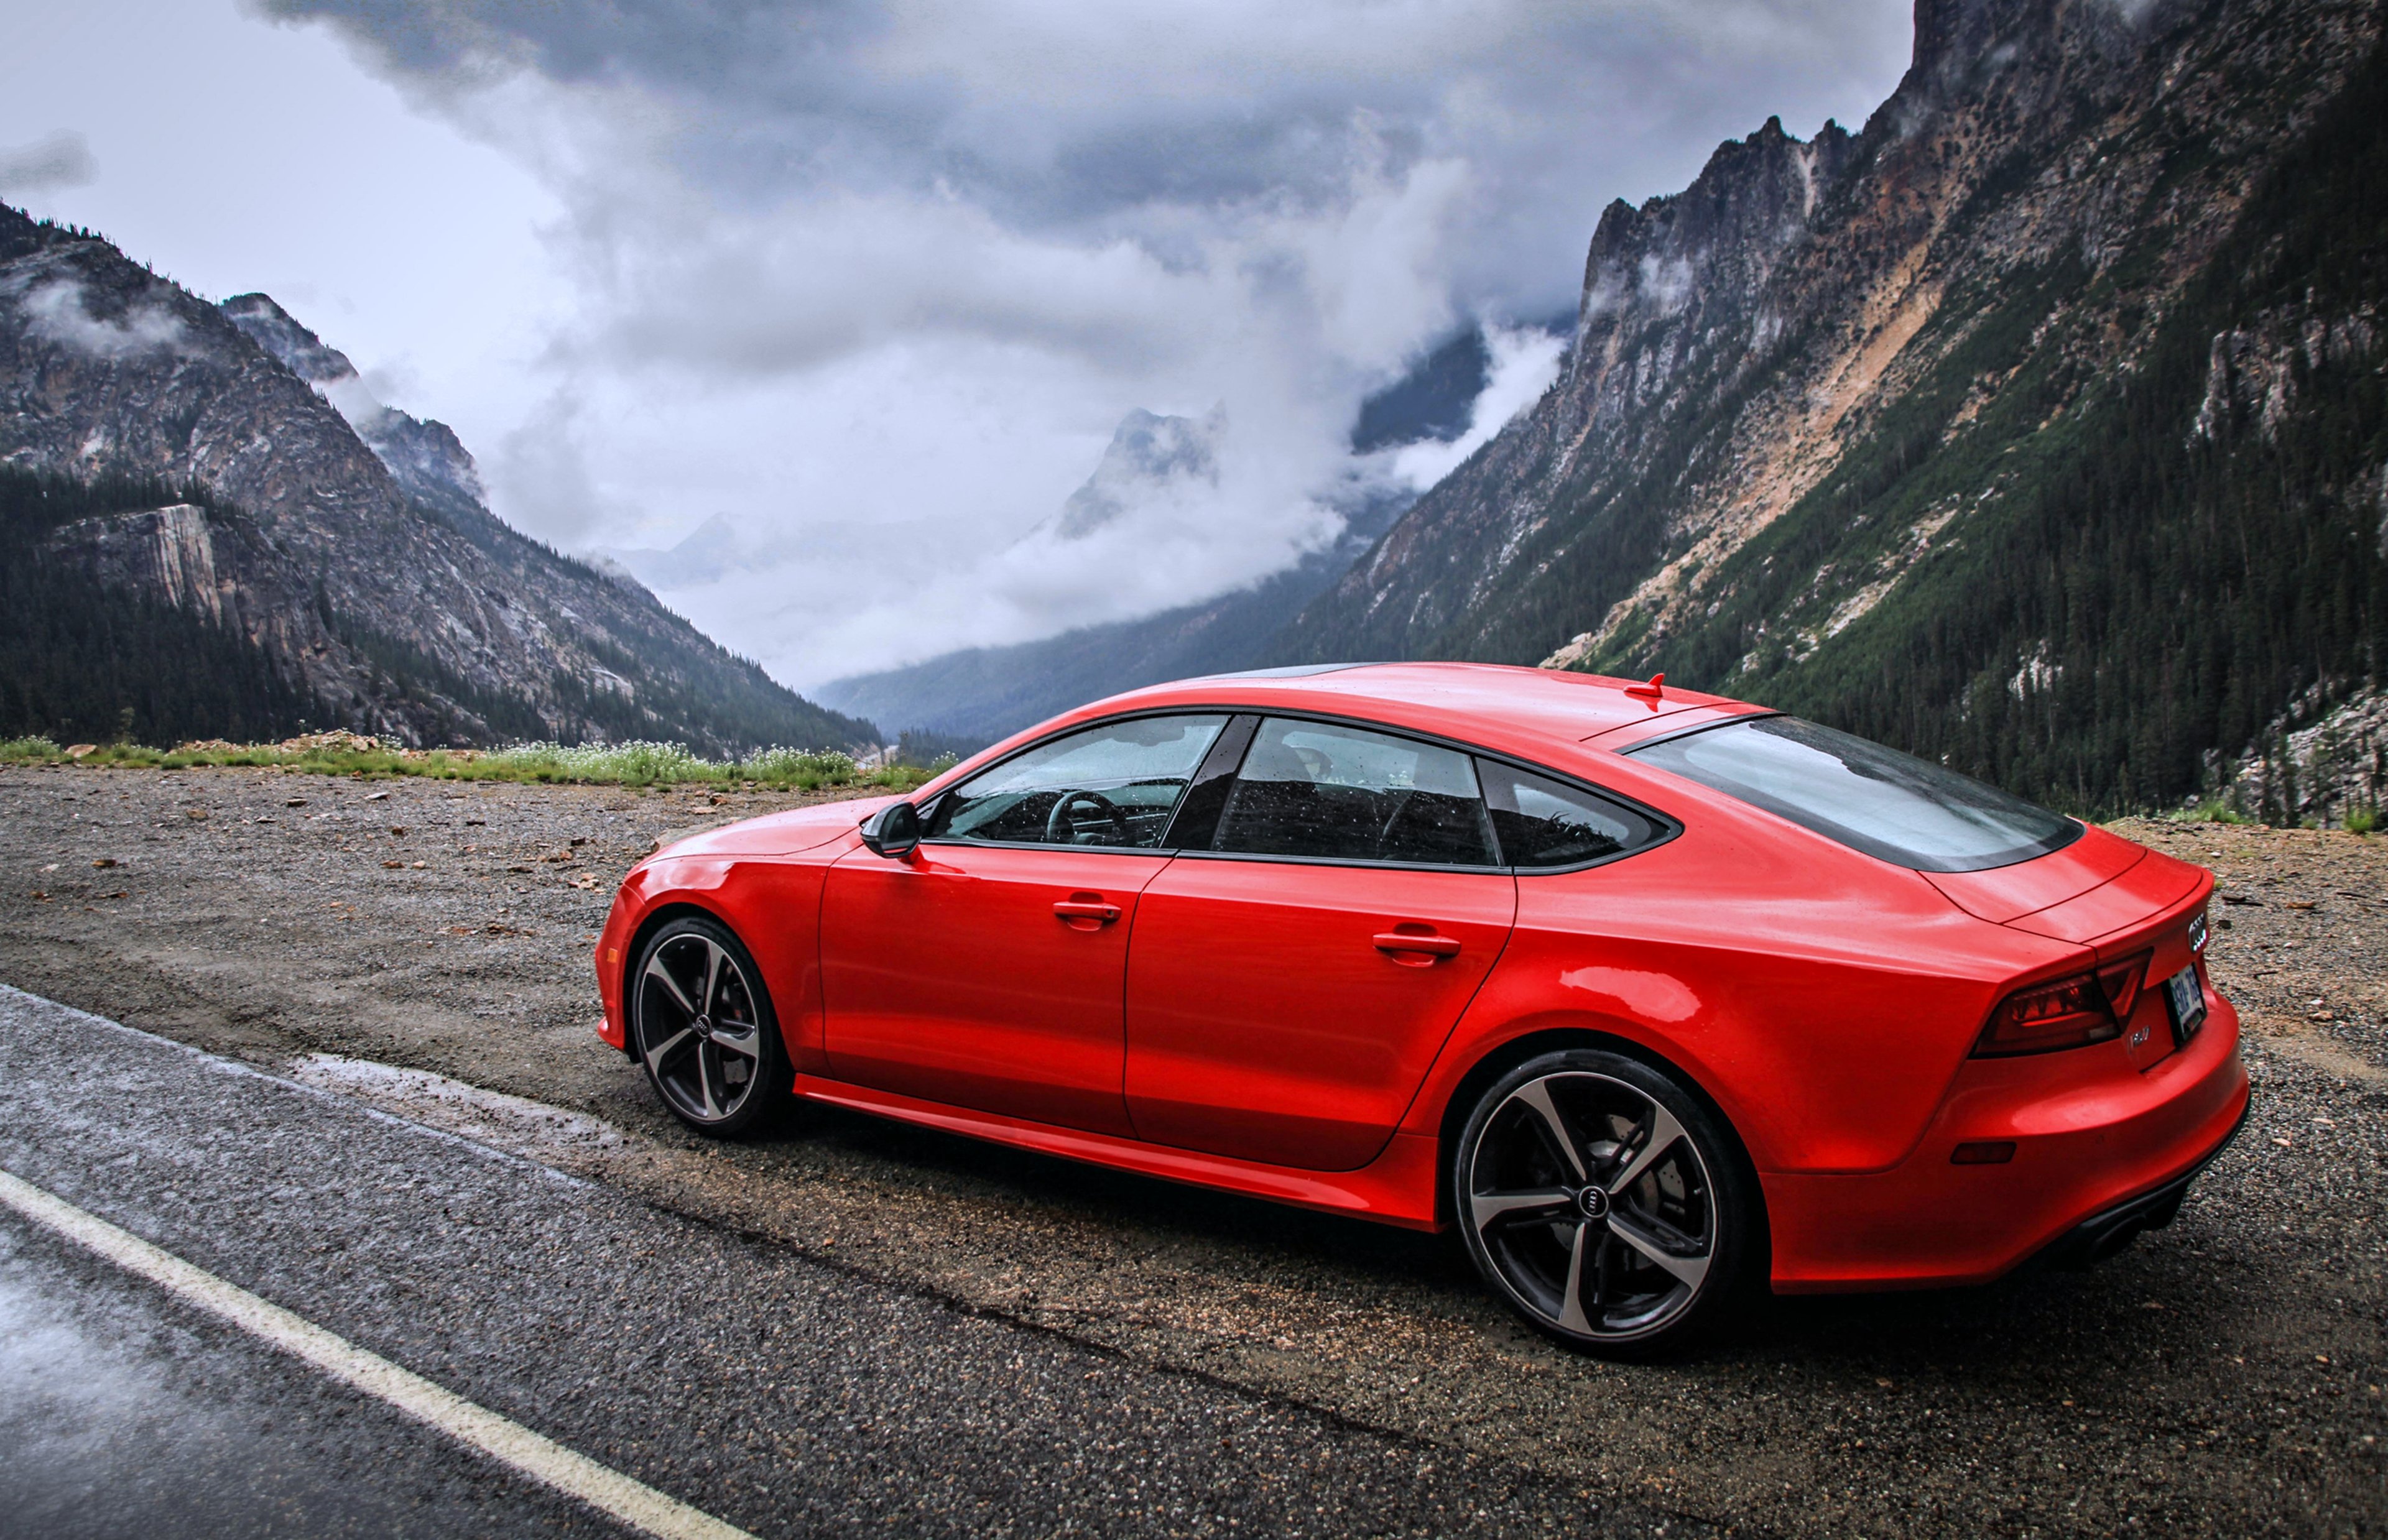 audi, Rs7, Red, Road, Mountains, Cloud, Speed, Motors, Cars Wallpaper